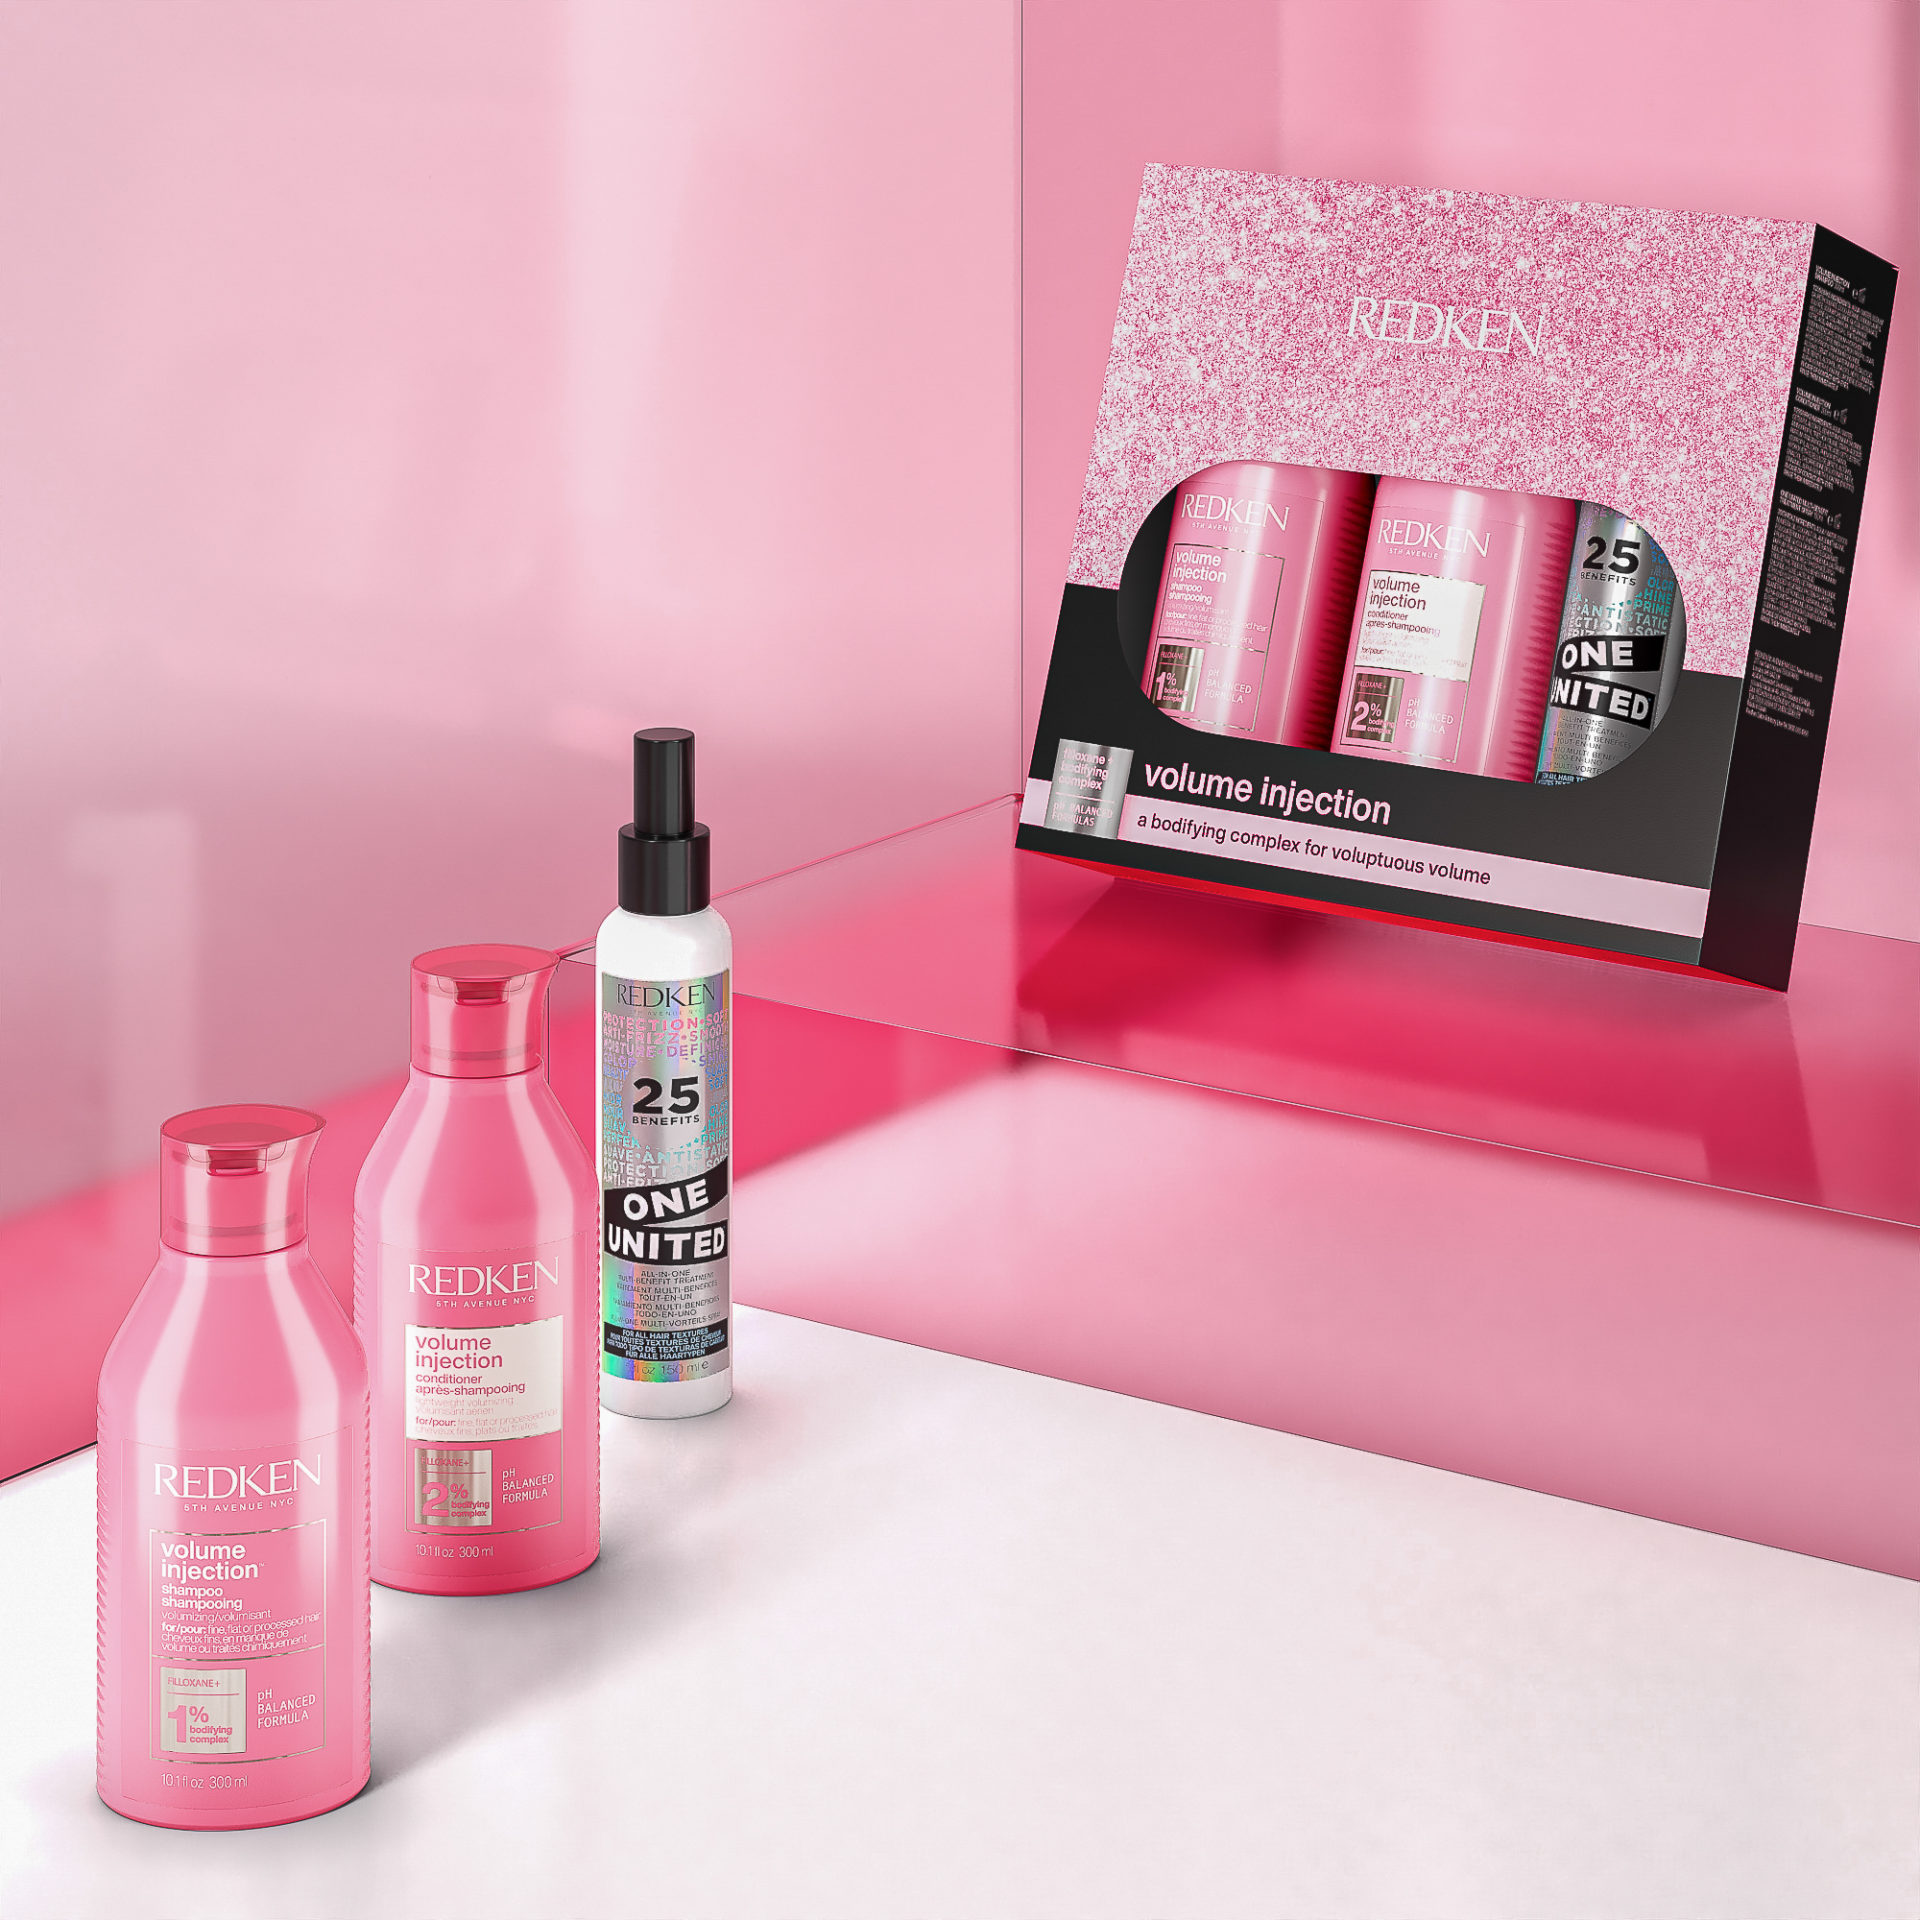 REDKEN VOLUME INJECTION GIFT SETS AT LOISE FUDGE HAIR COLOUR SALON WIRRAL